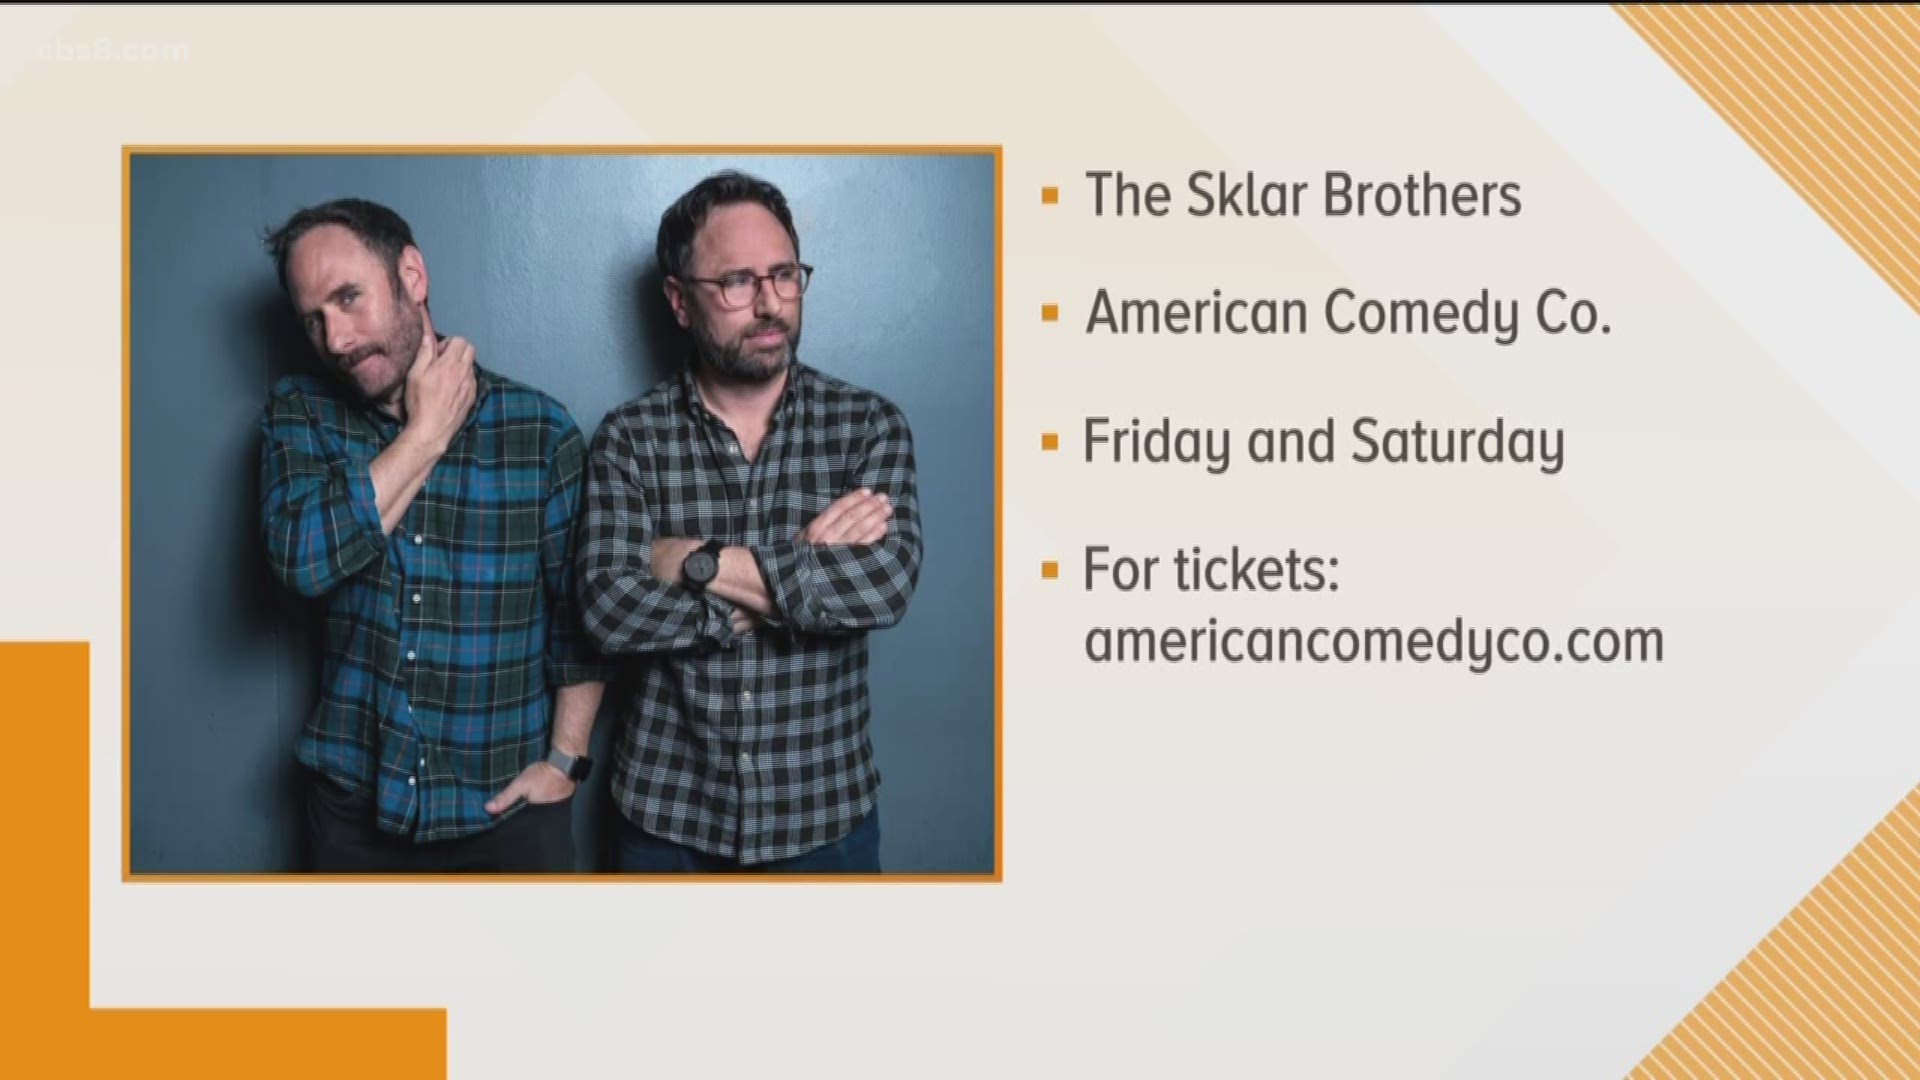 Brotherly laughs with two Sklar Brothers at the American Comedy Co.